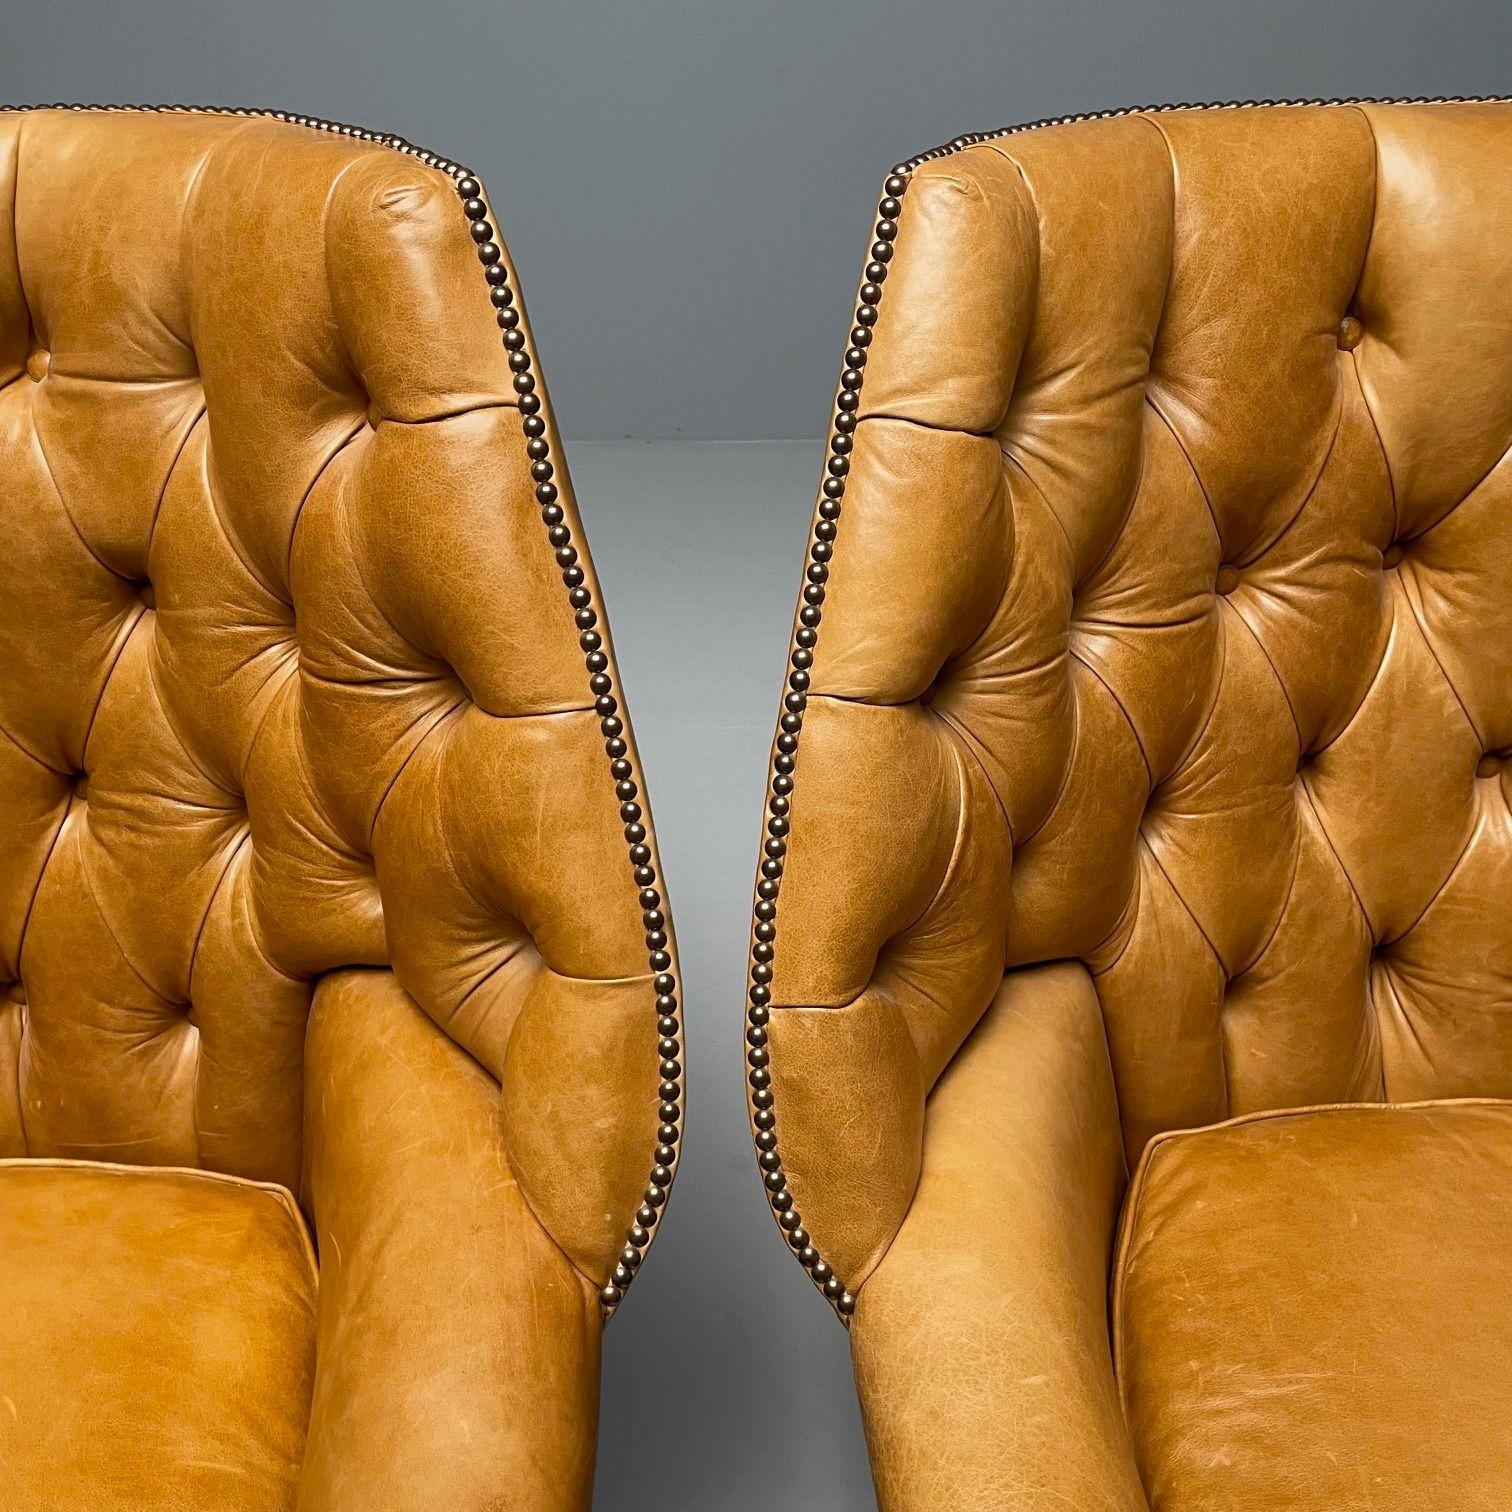 Georgian, Large Tufted Lounge Chairs and Ottomans, Tan Leather, USA, 2000s For Sale 6